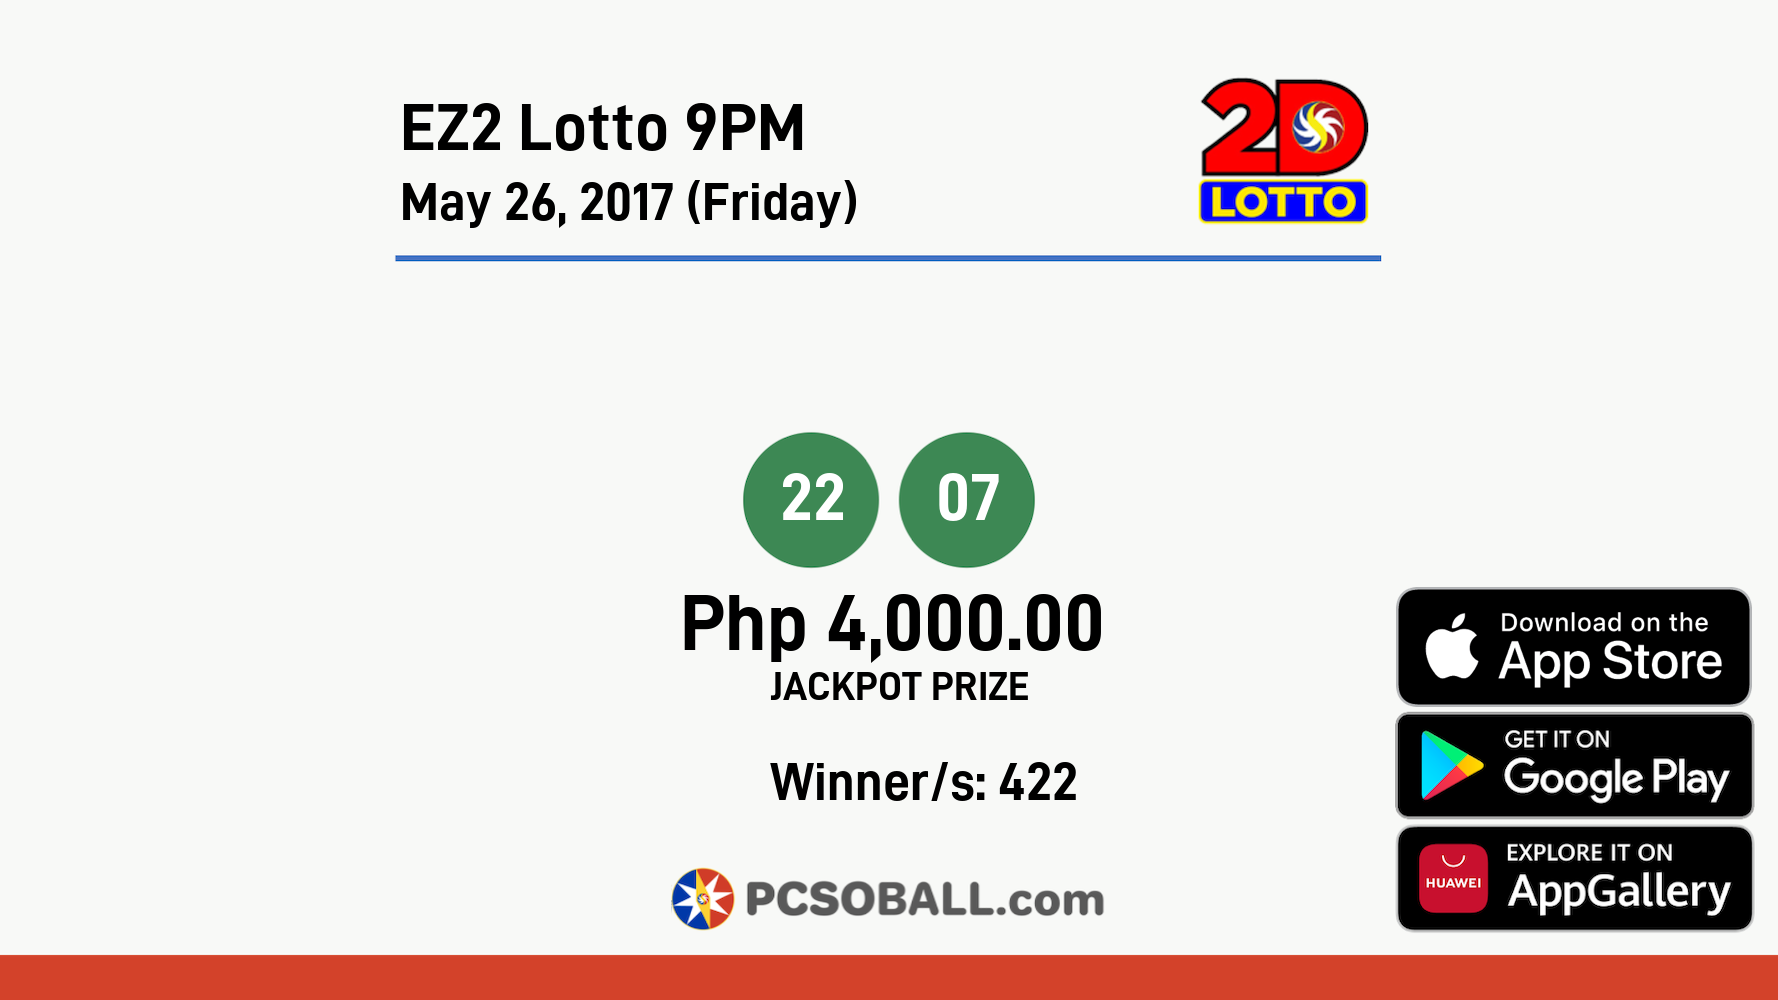 EZ2 Lotto 9PM May 26, 2017 (Friday) Result